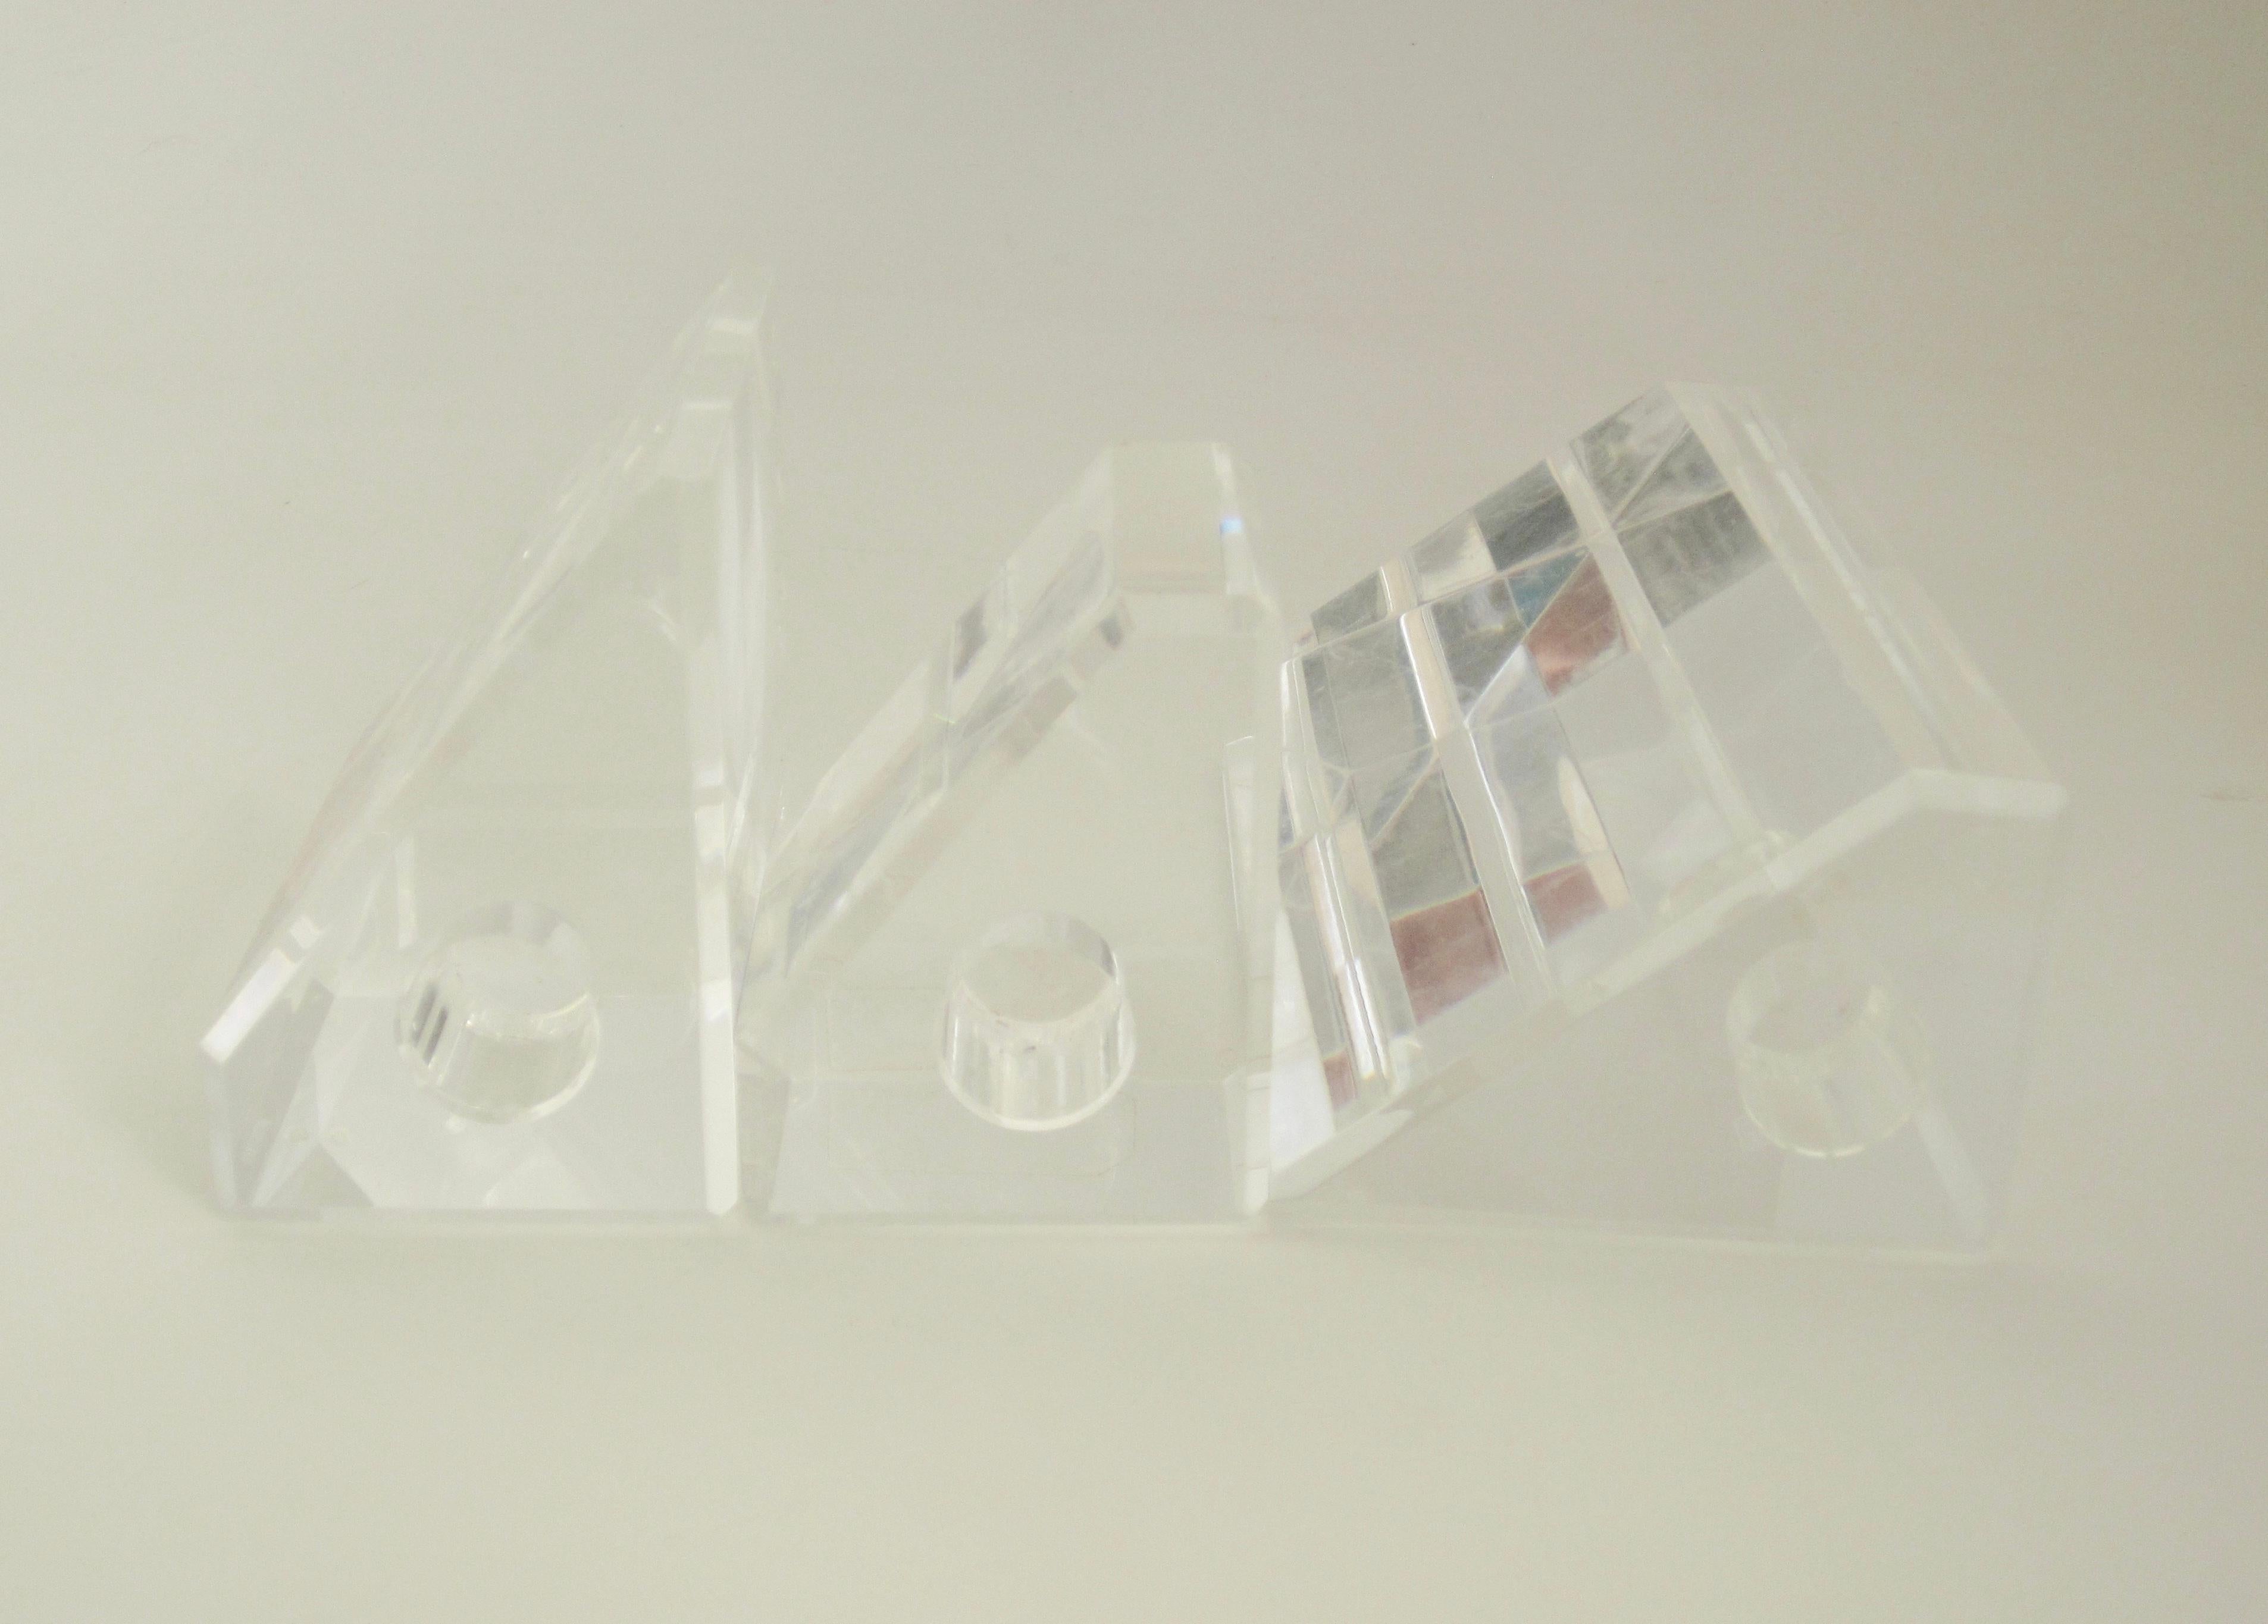 Set of Three Modernist Geometric Form Lucite Candlesticks For Sale 5